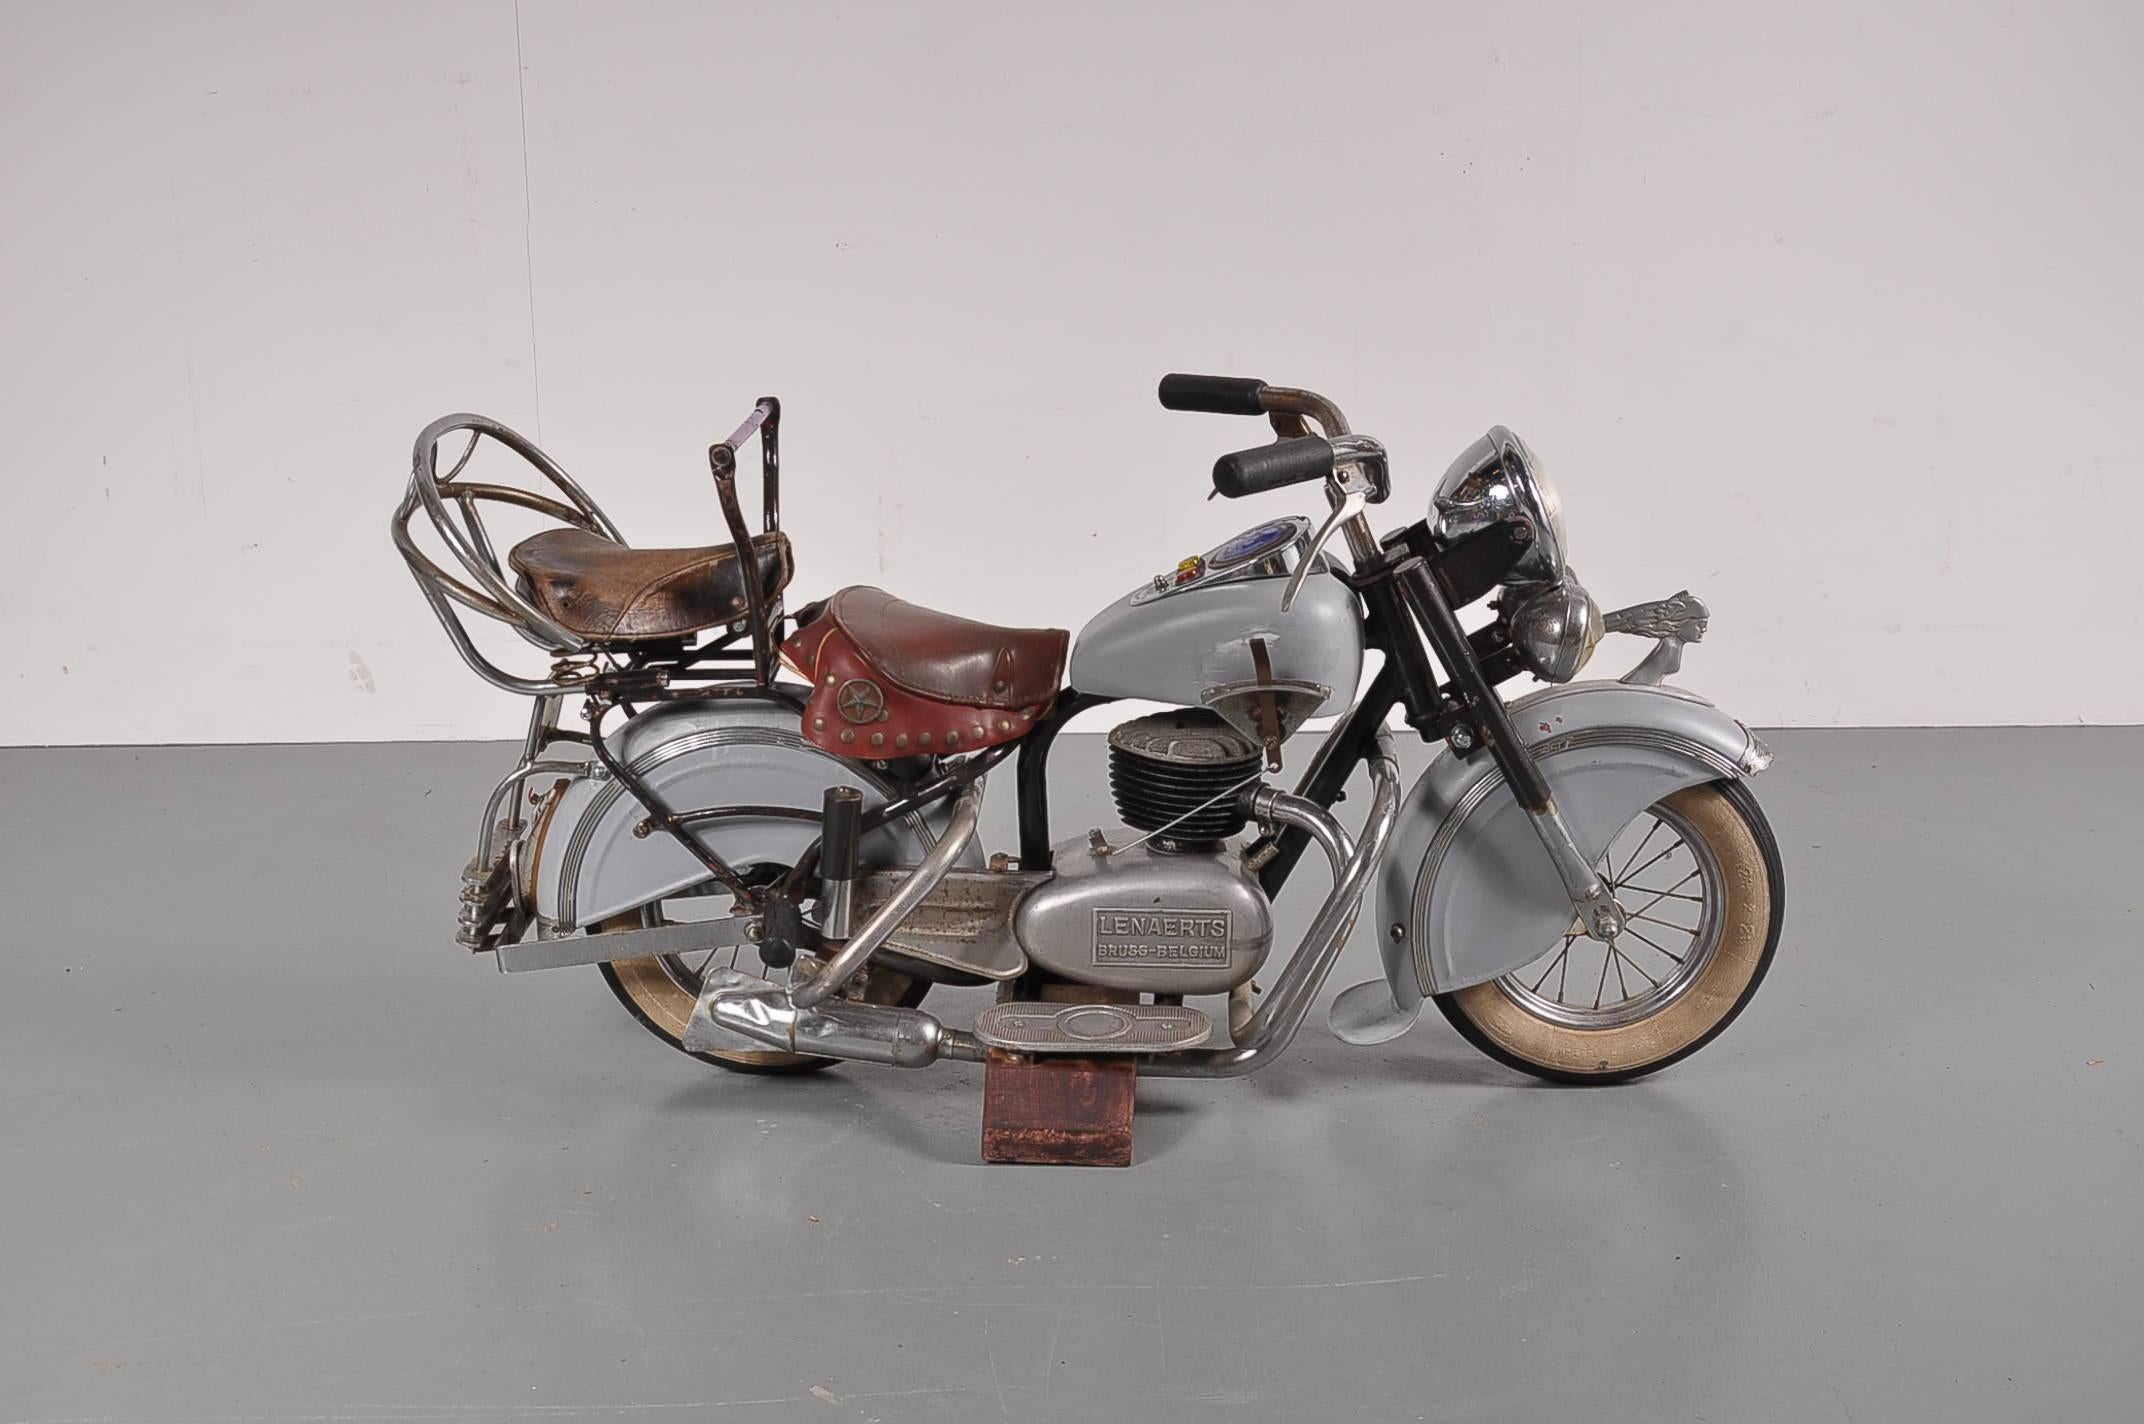 A very rare carousel motorbike, manufactured by Lenaerts, circa 1950.

This eye-catching model remains in beautiful original condition. It is made of high quality metal in a nice grey color, with a brown leather seat and a red leather seat. It has